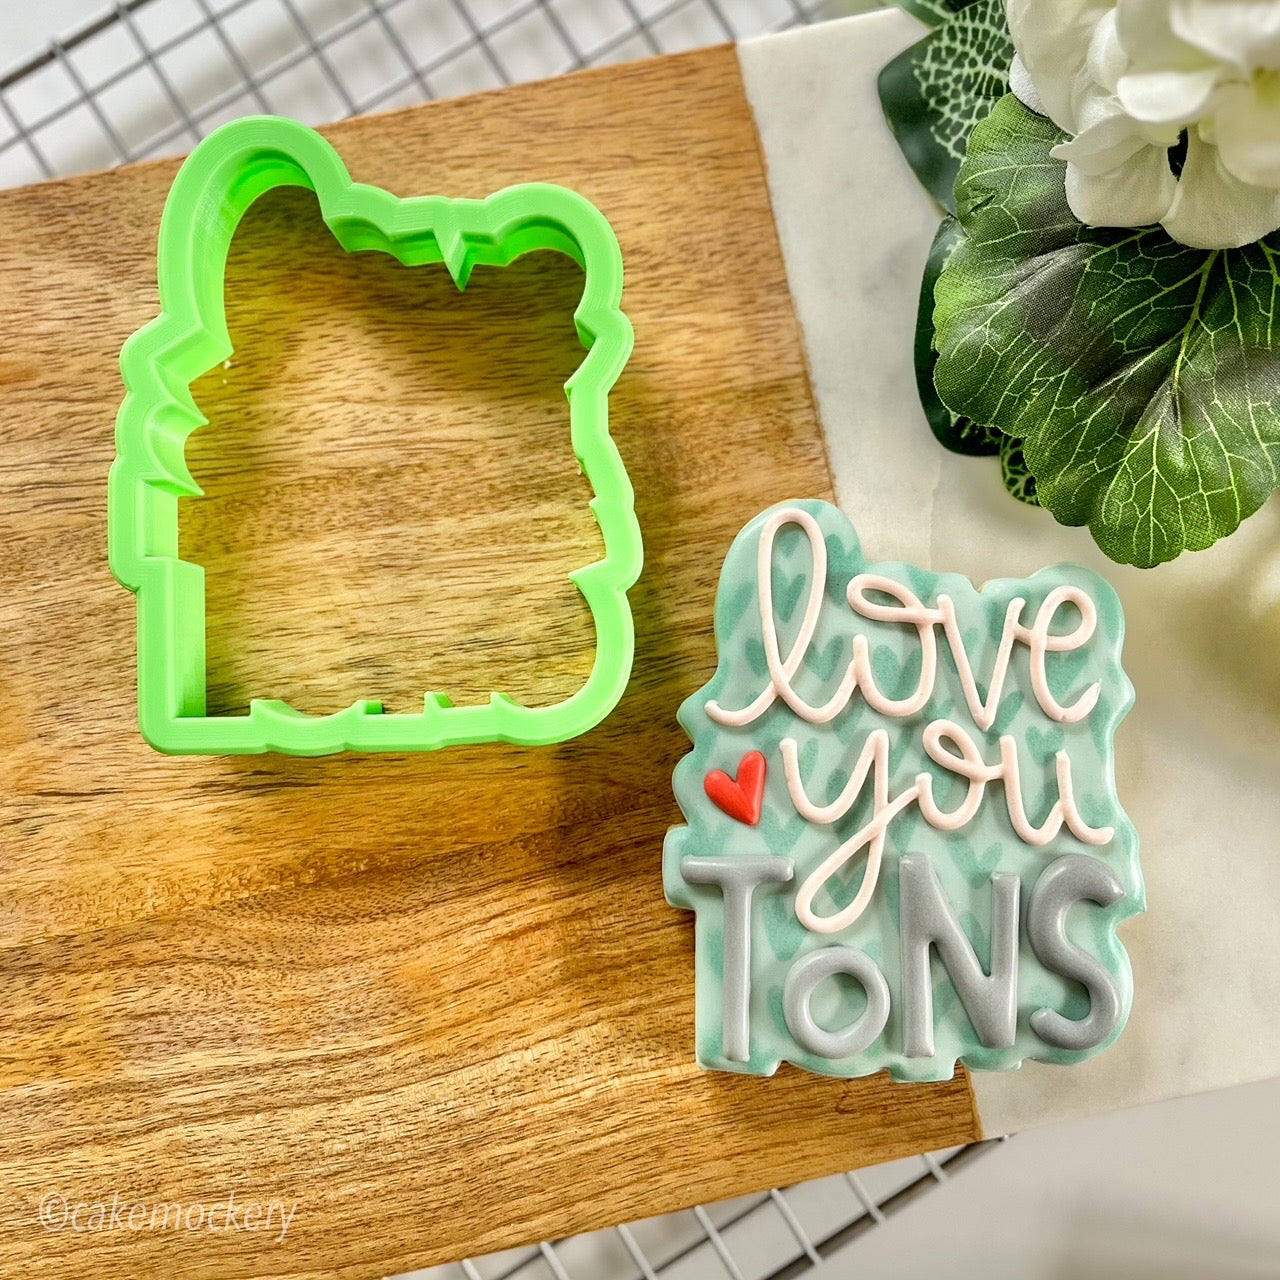 Love You Tons Lettering Cookie Cutter